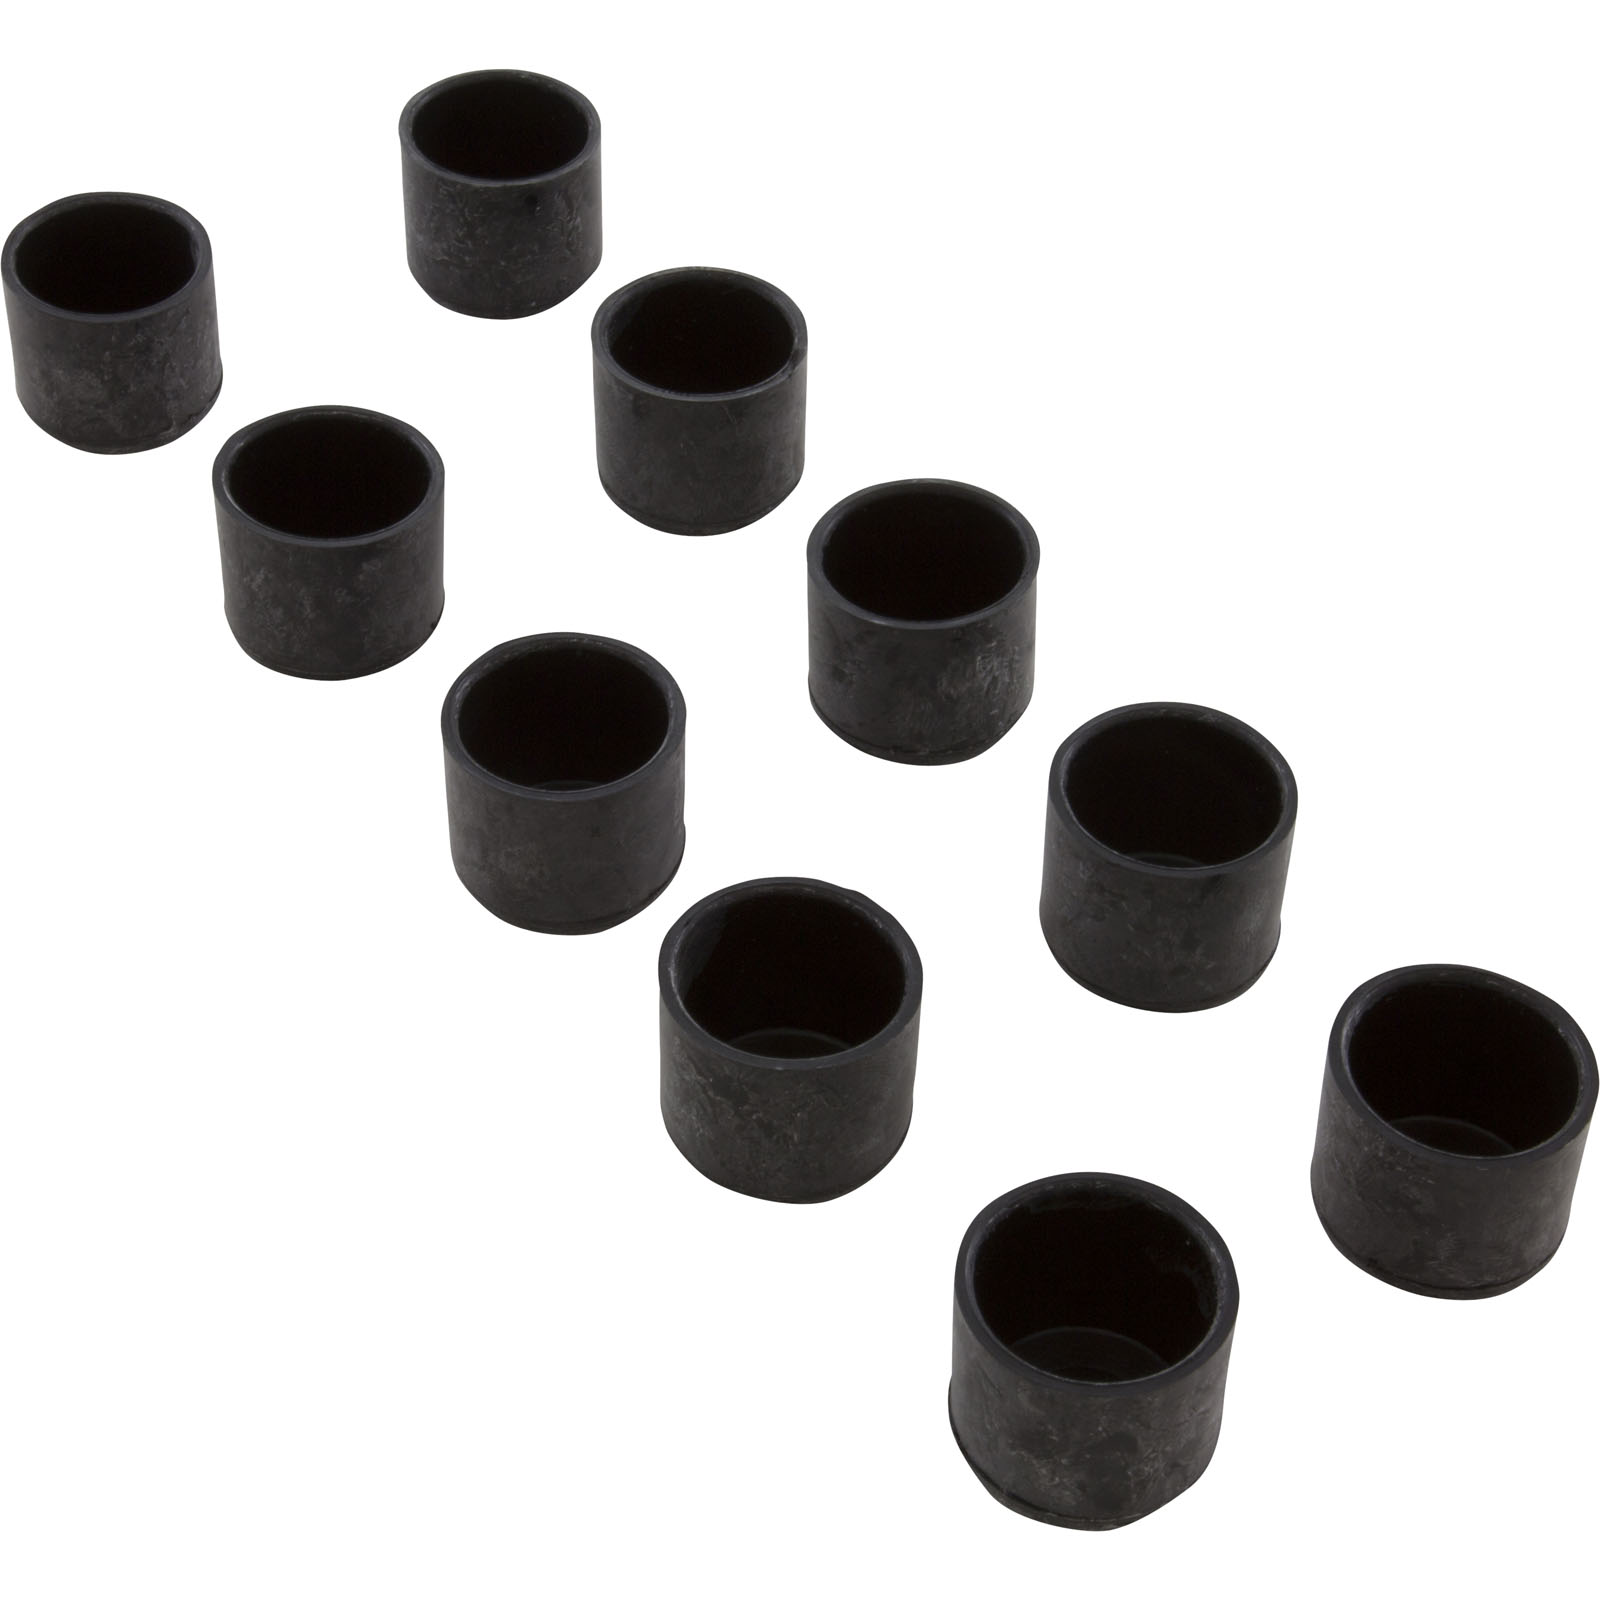 Picture of 99-30-4300525 Fence Post Cap GLI Pool Products Vinyl Black Qty 10